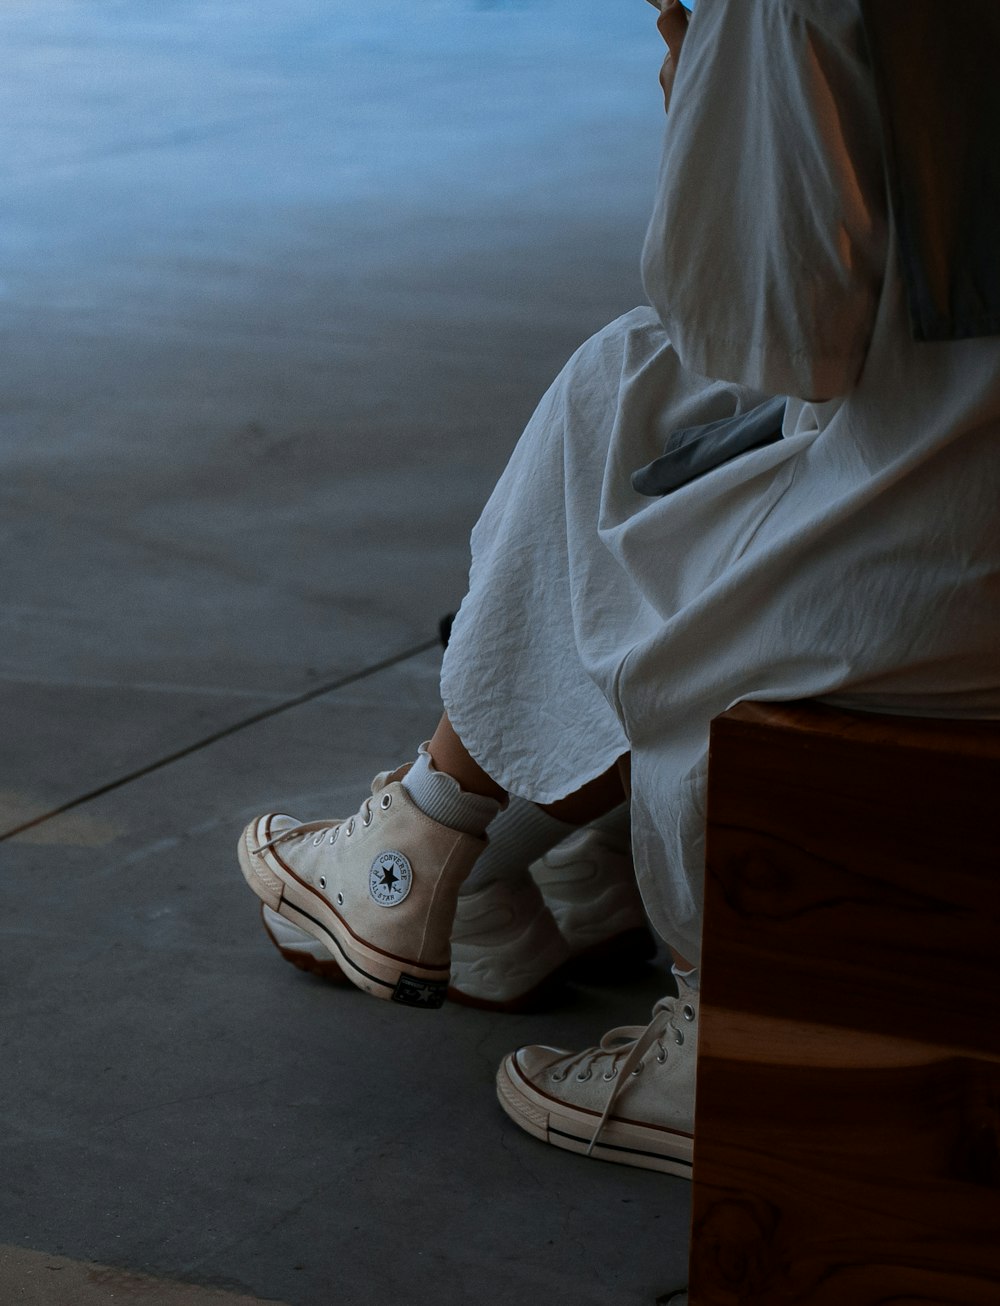 a person wearing a white dress and white shoes